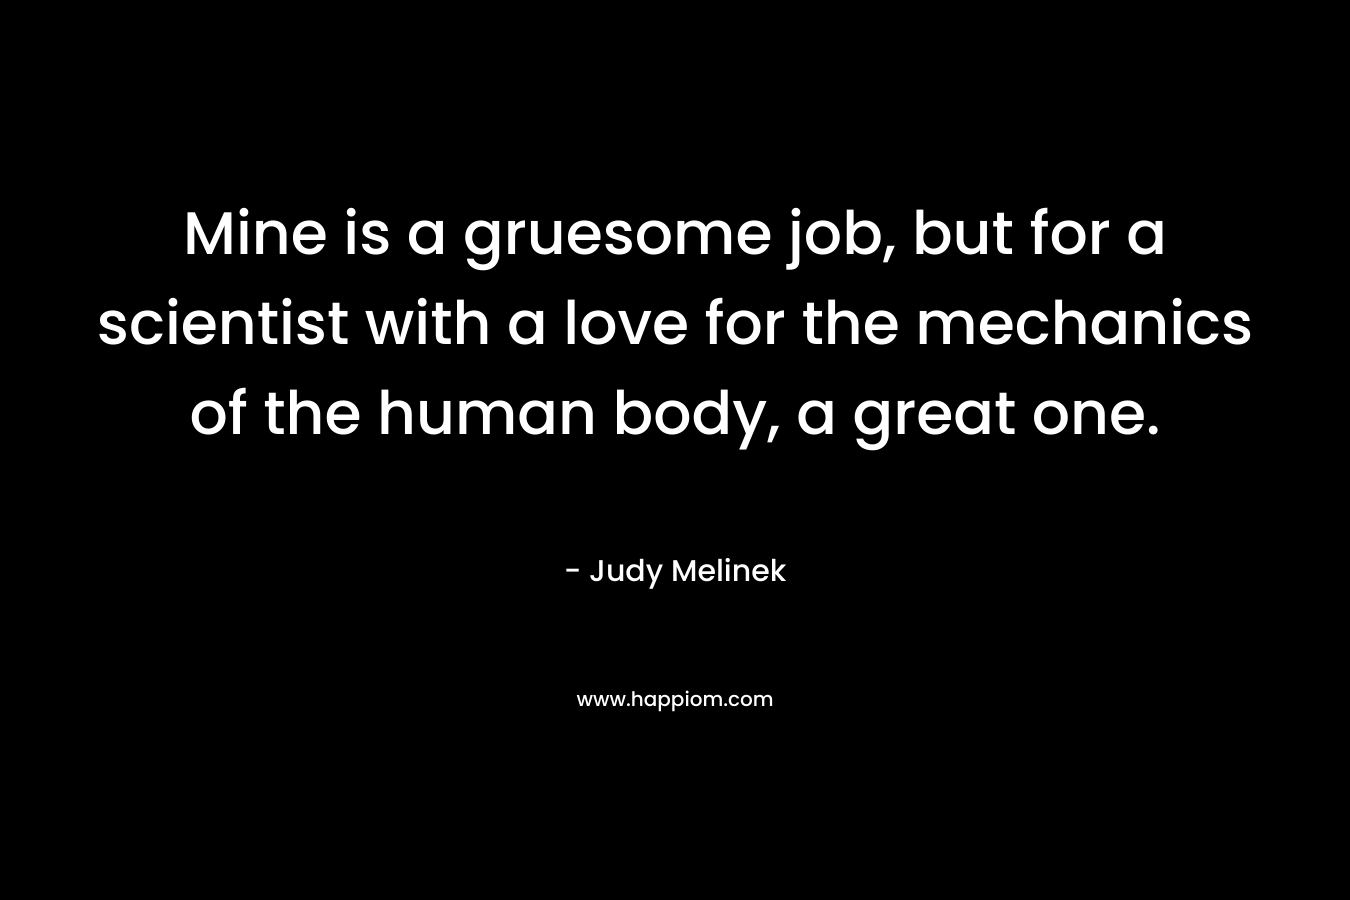 Mine is a gruesome job, but for a scientist with a love for the mechanics of the human body, a great one.